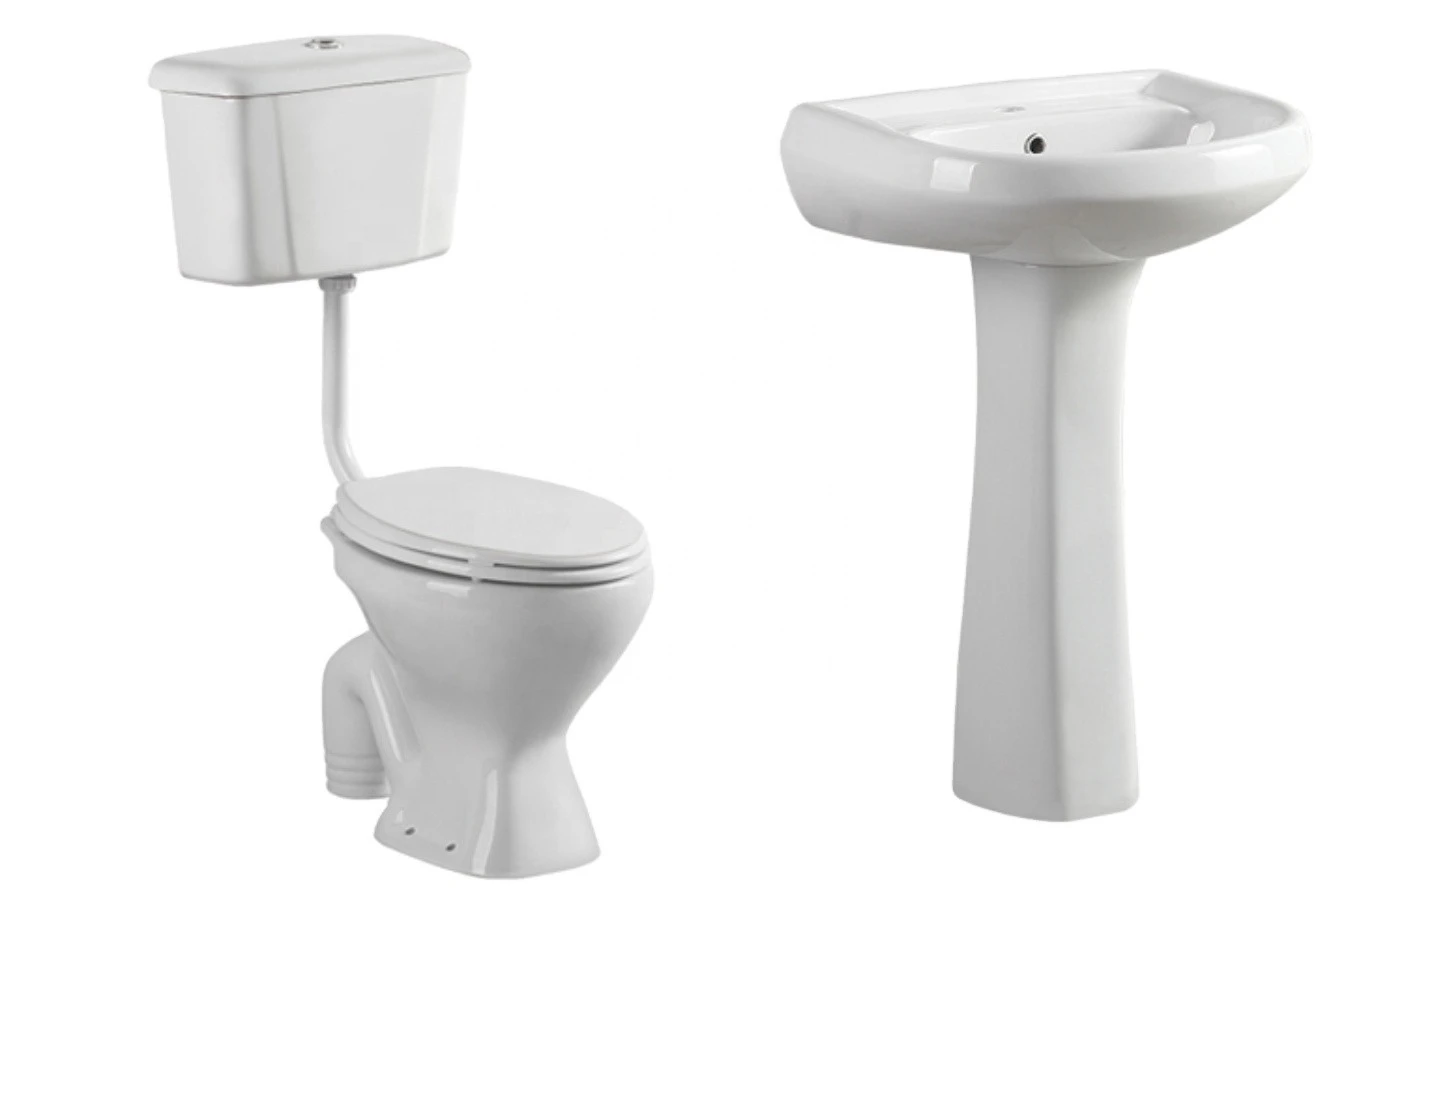 Europe Africa Nigeria Cheap Ceramic sanitary ware Bathroom Two Piece Wash down WC Toilet with bowl seat cover Toilets